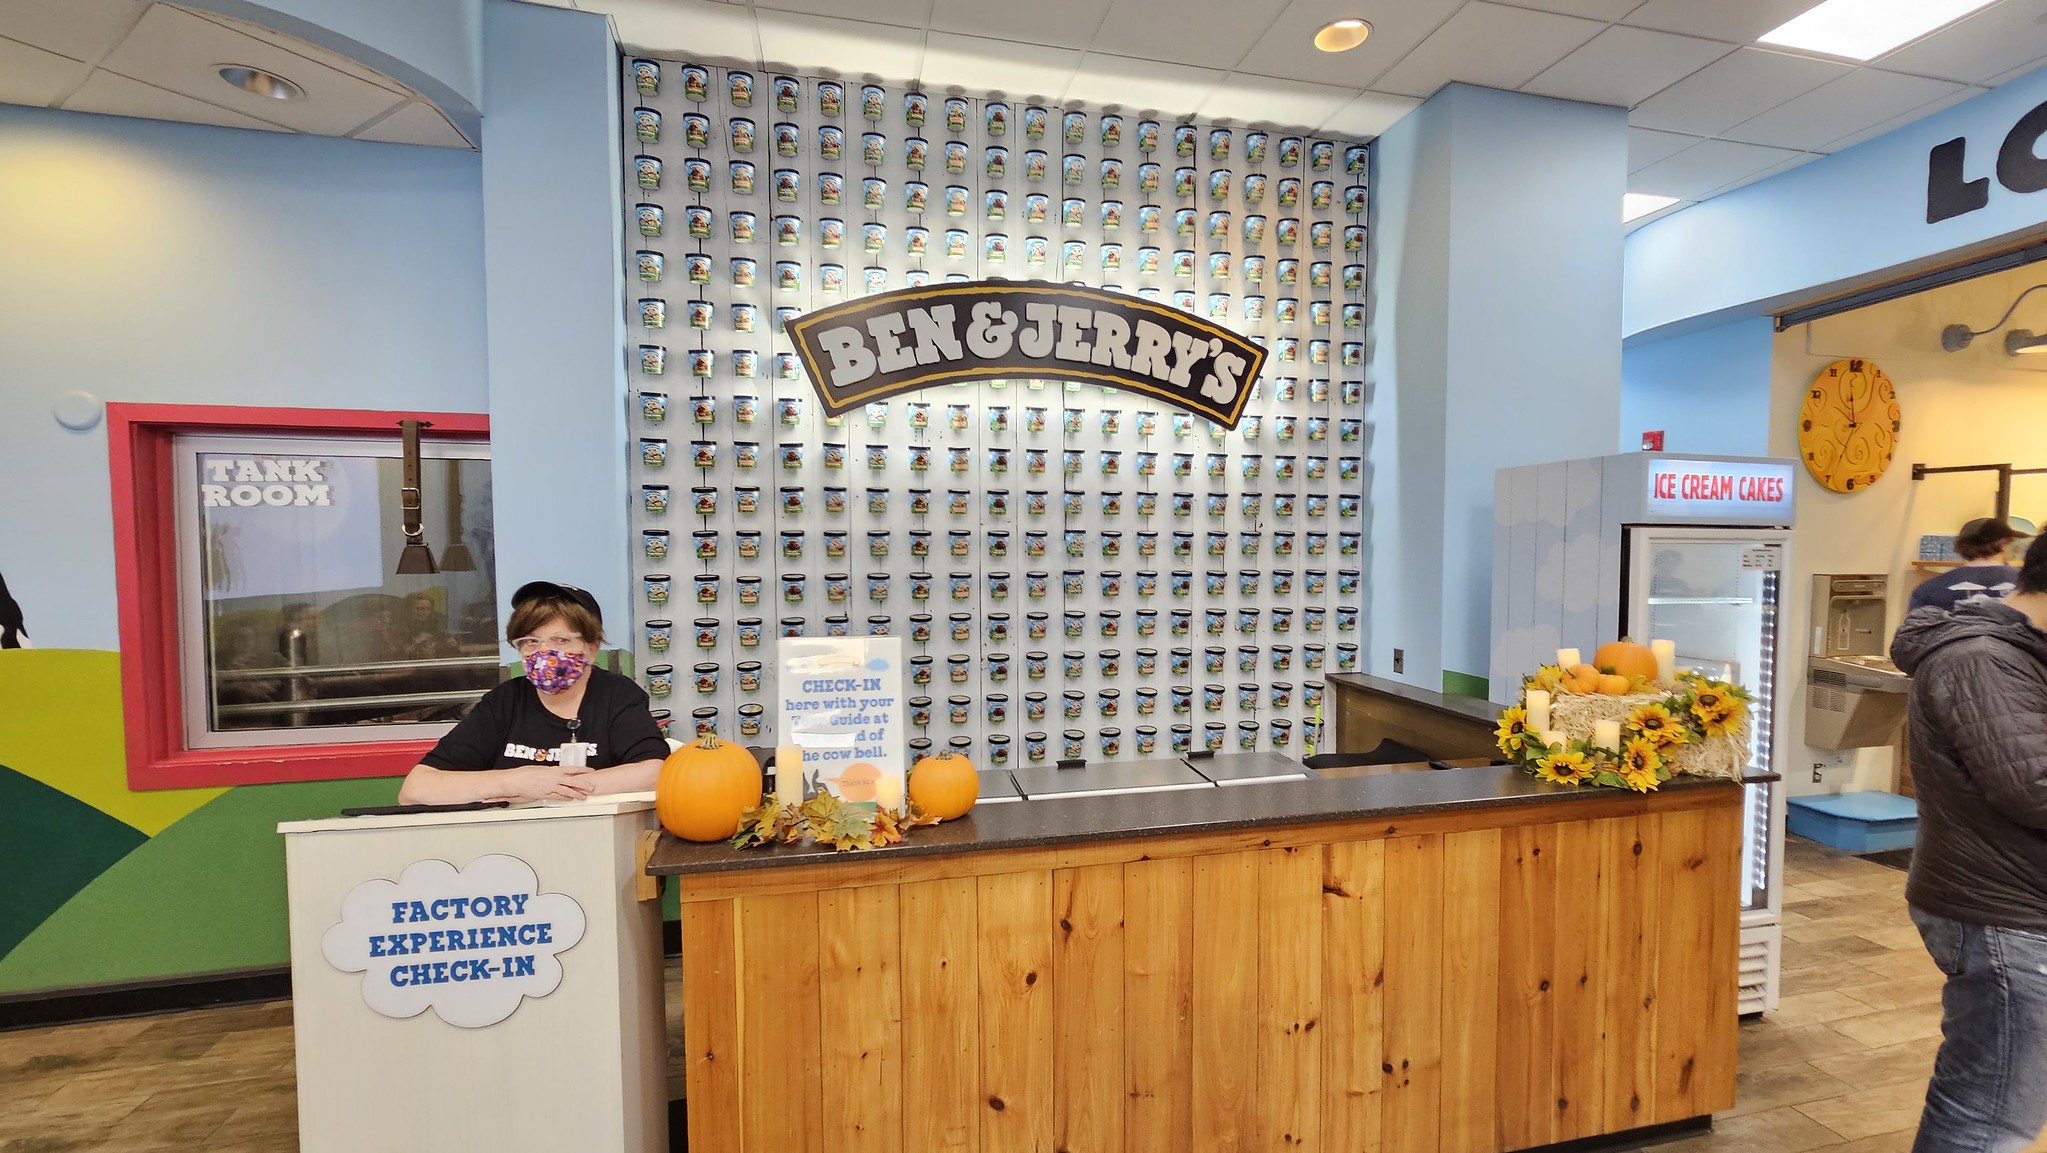 The factory check-in desk at B&J's in Waterbury, Vermont